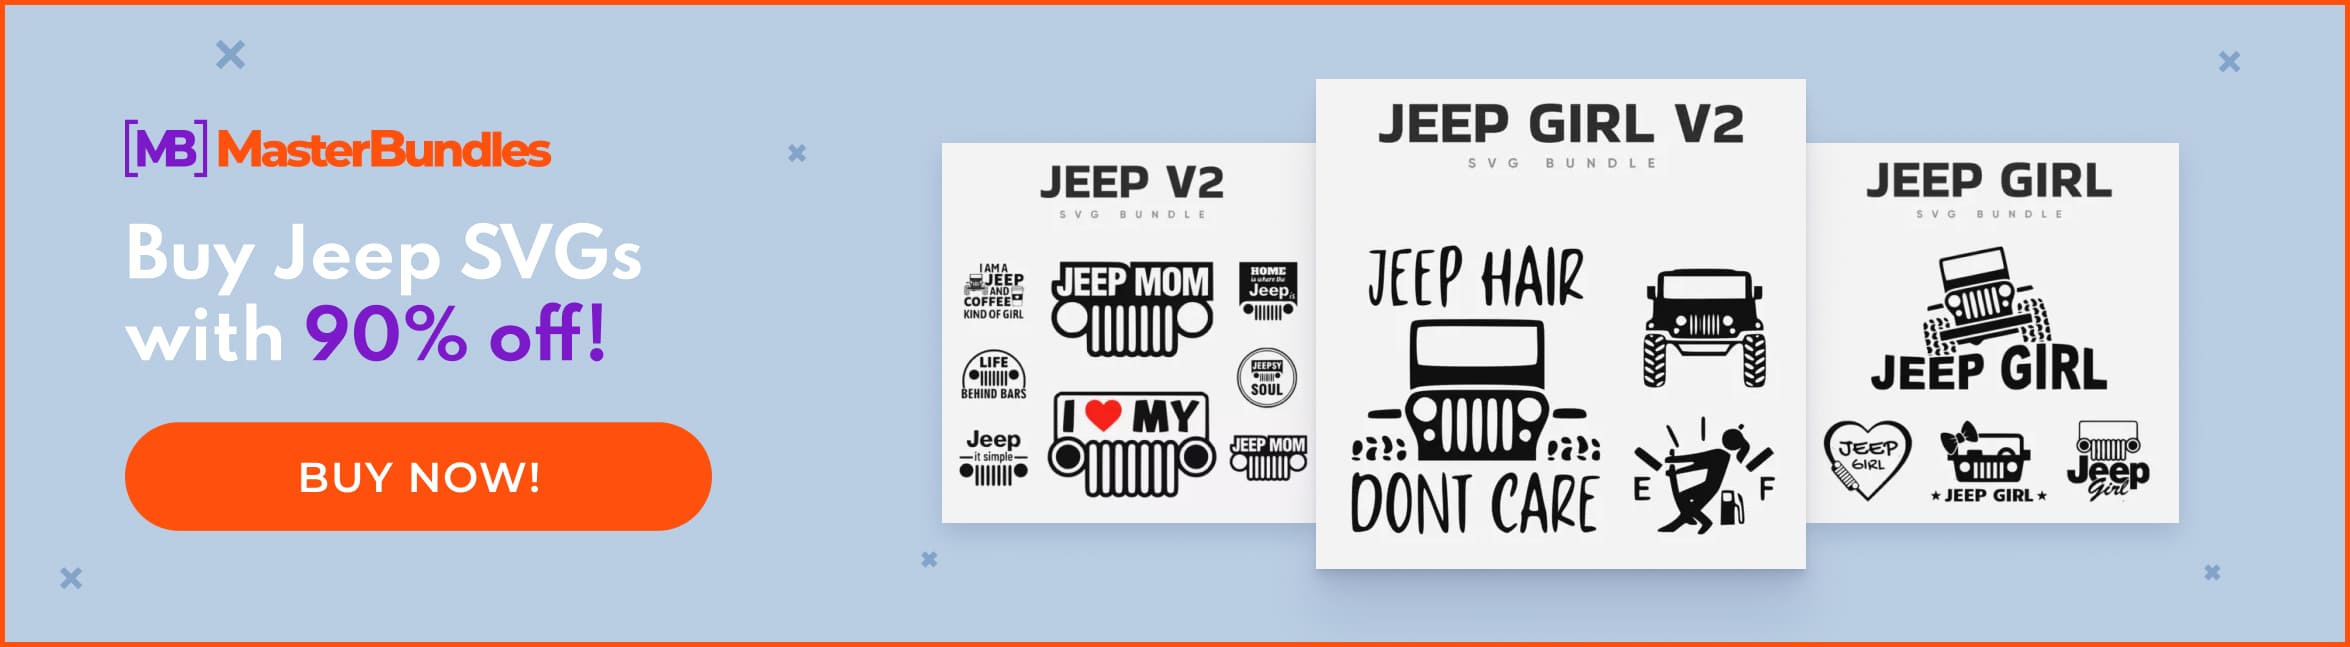 Banner for Jeep SVG Images.